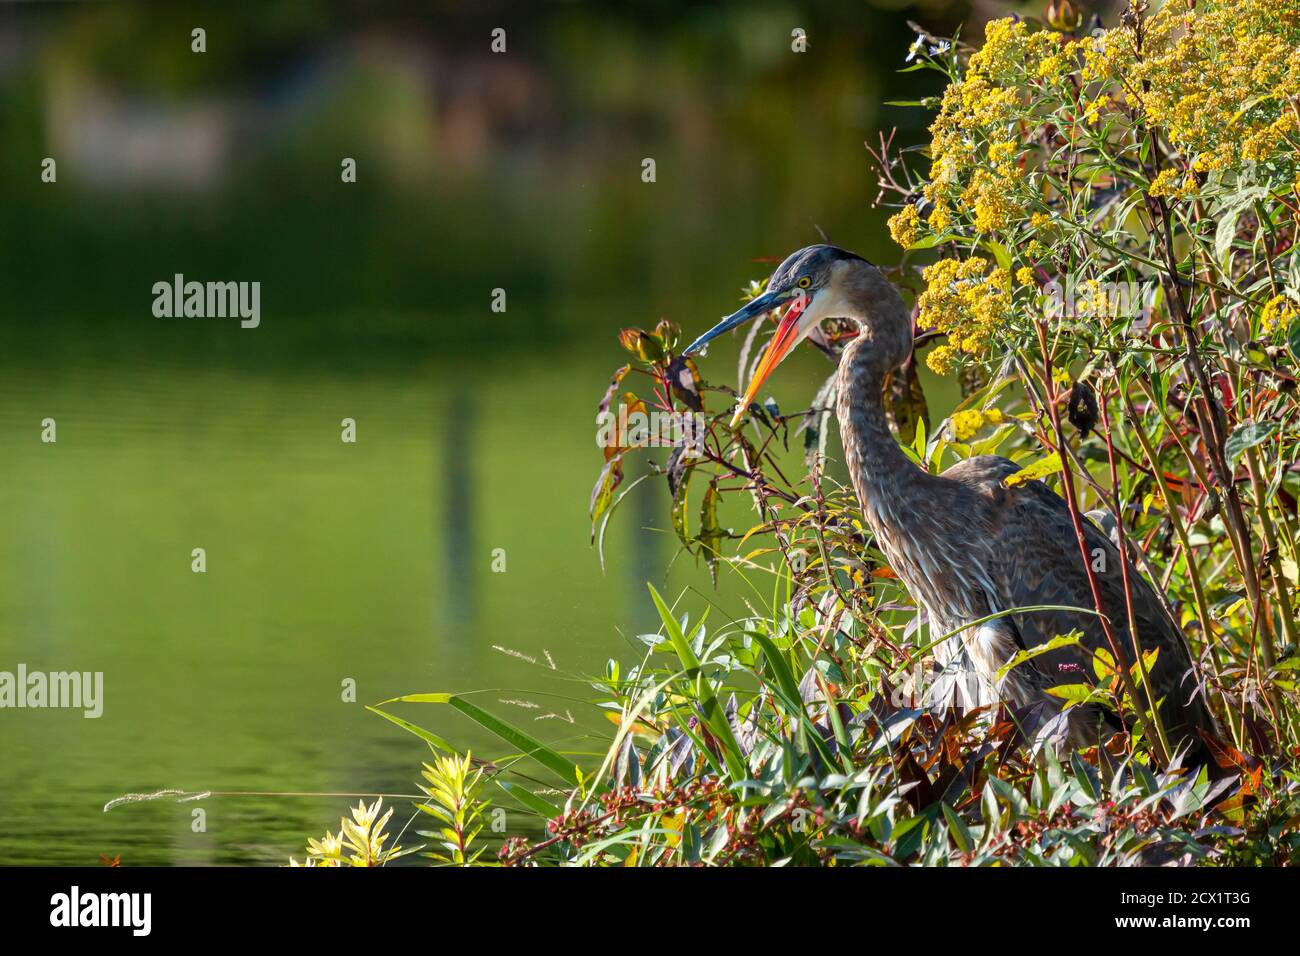 Close up image of a great blue heron (Ardea herodias) with its mouth open wide, hiding among the reeds. Image also shows the wetland swamp with tall g Stock Photo